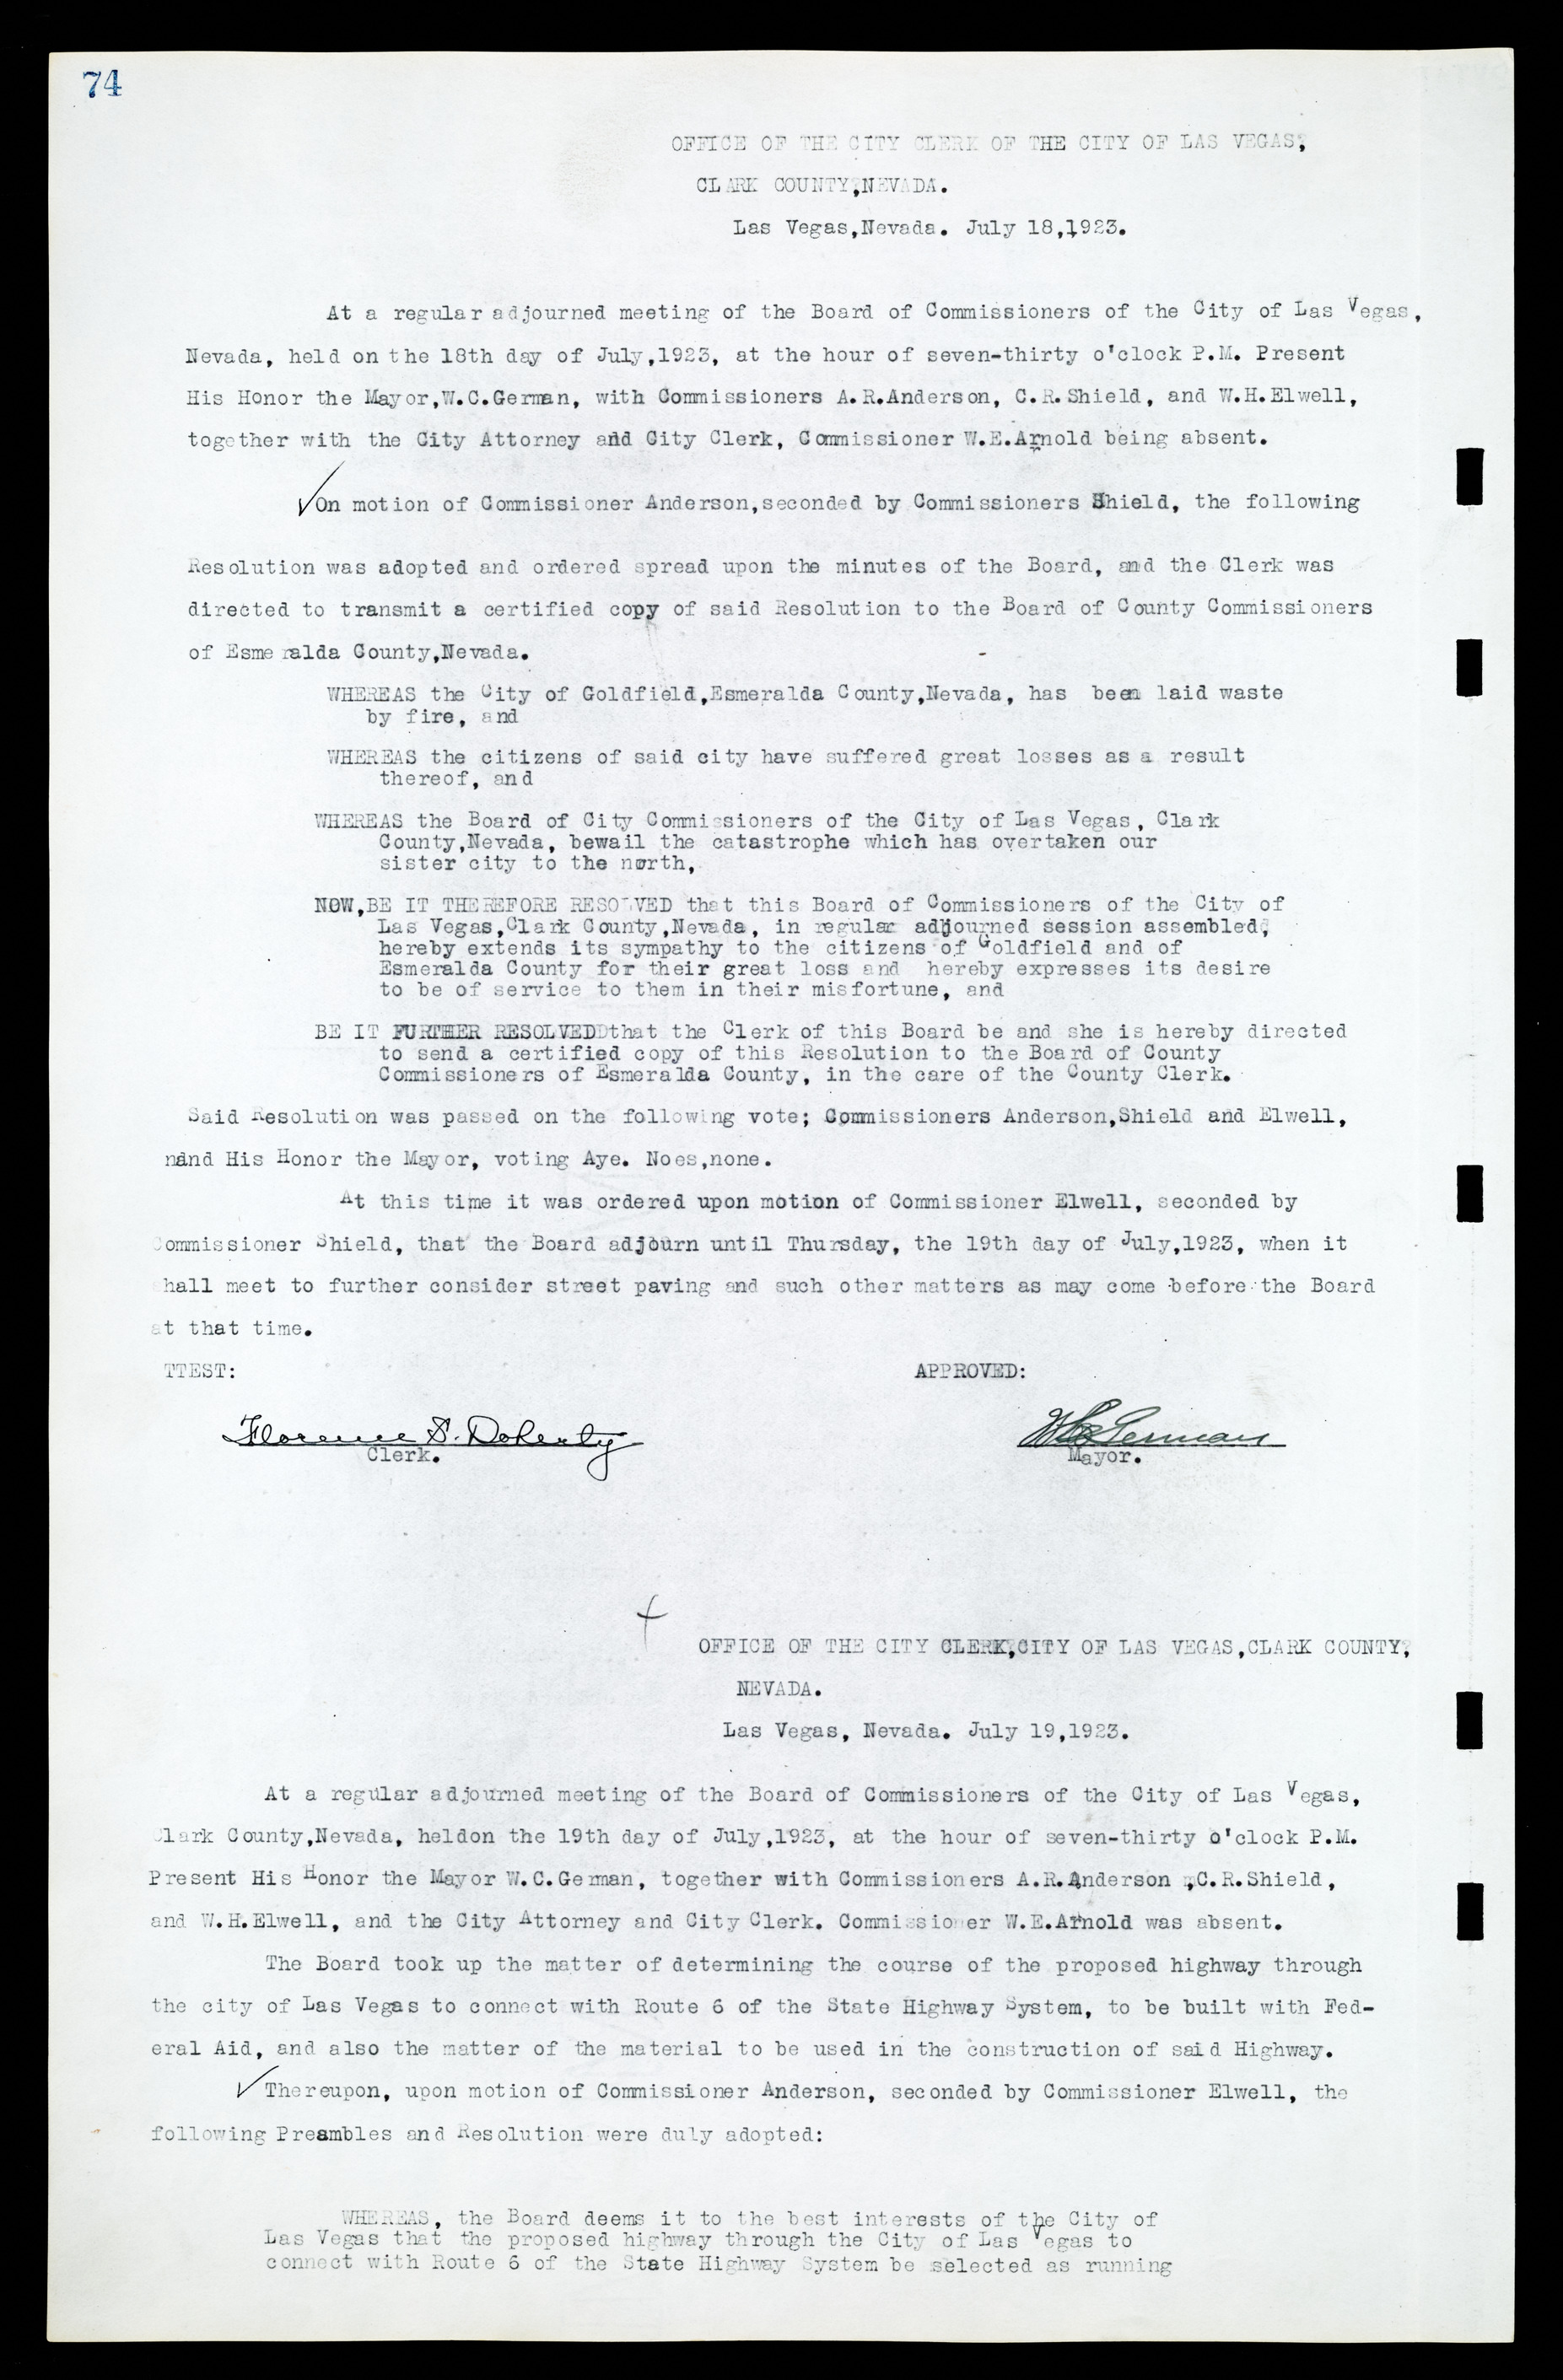 Las Vegas City Commission Minutes, March 1, 1922 to May 10, 1929, lvc000002-81